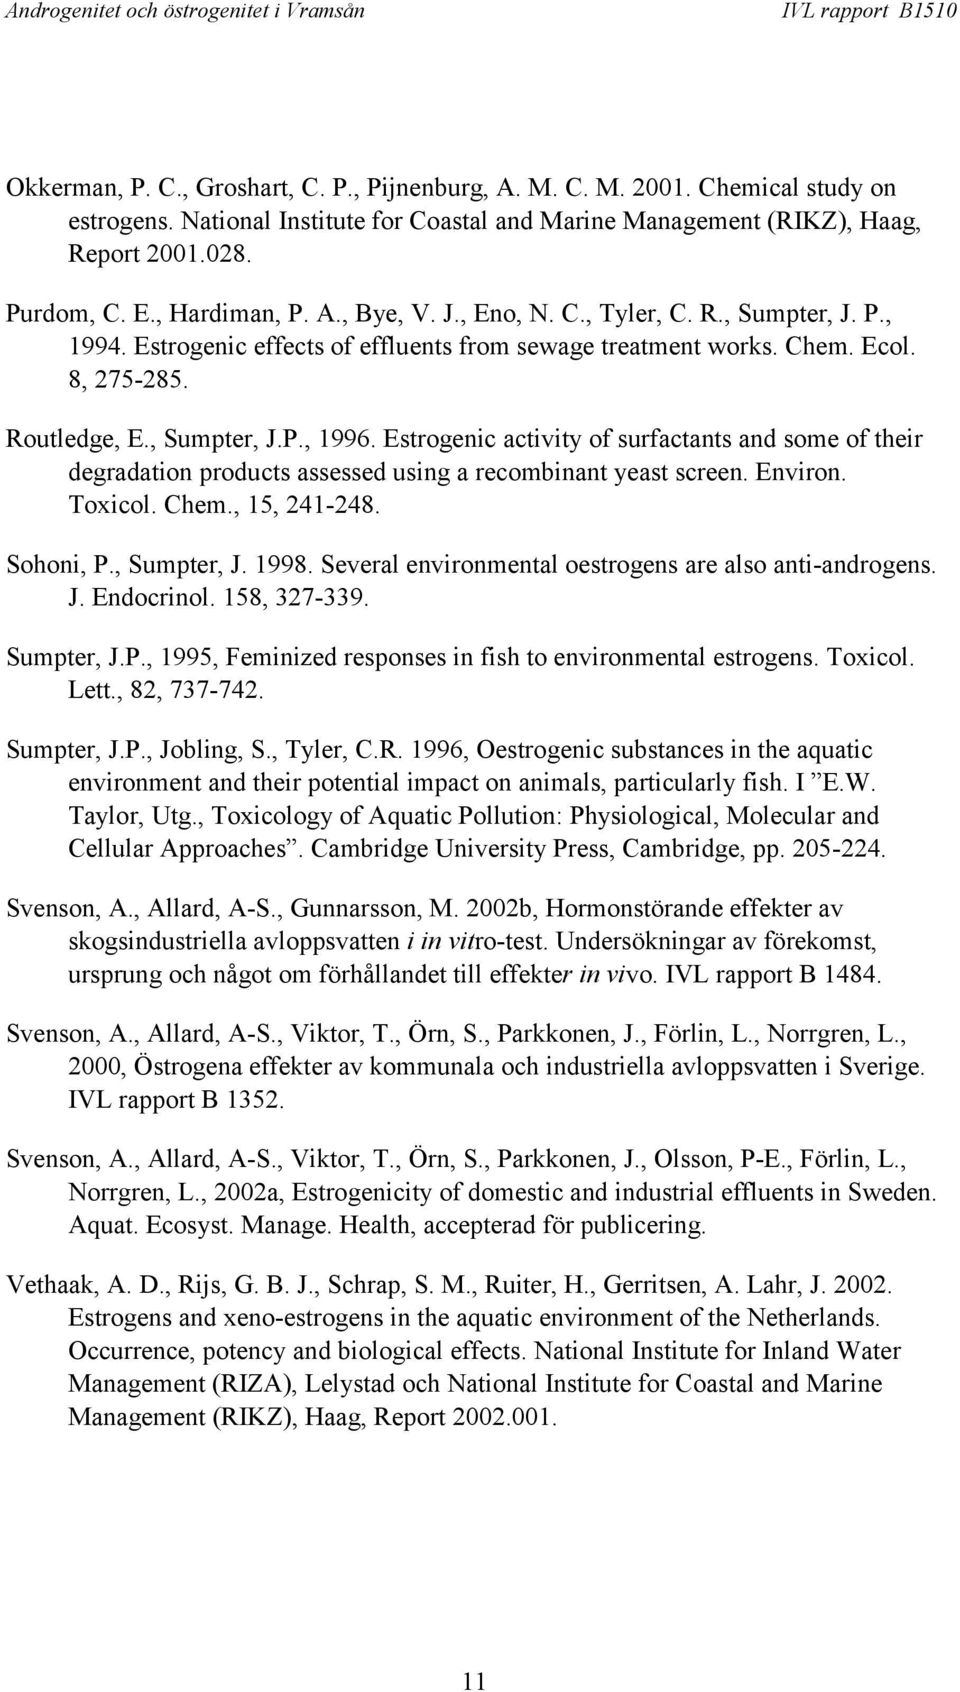 Estrogenic activity of surfactants and some of their degradation products assessed using a recombinant yeast screen. Environ. Toxicol. Chem., 15, 241-248. Sohoni, P., Sumpter, J. 1998.